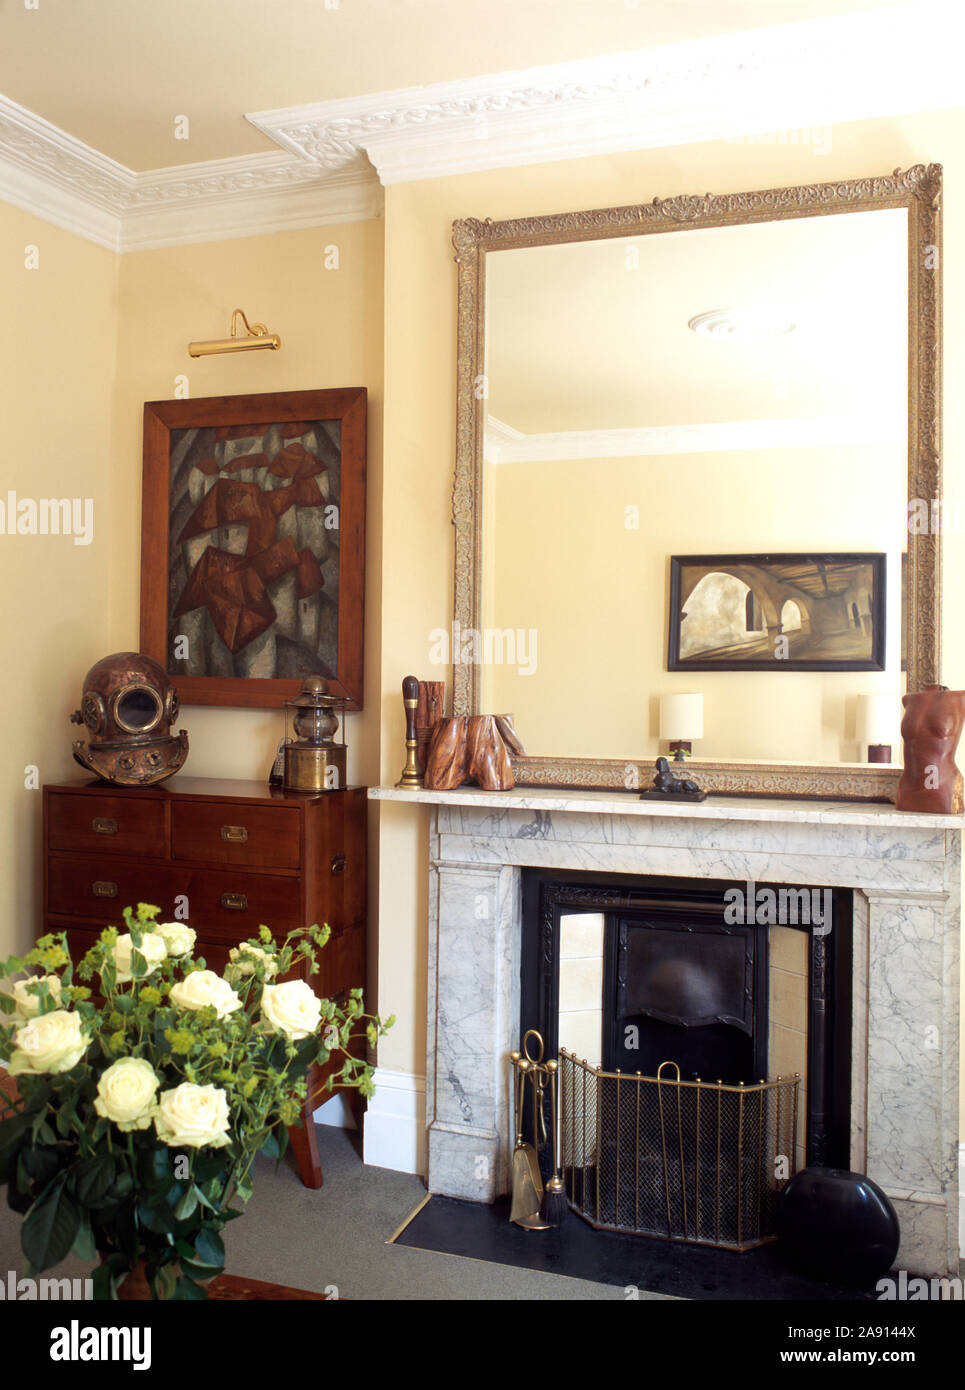 Mirror above fireplace in townhouse living room Stock Photo